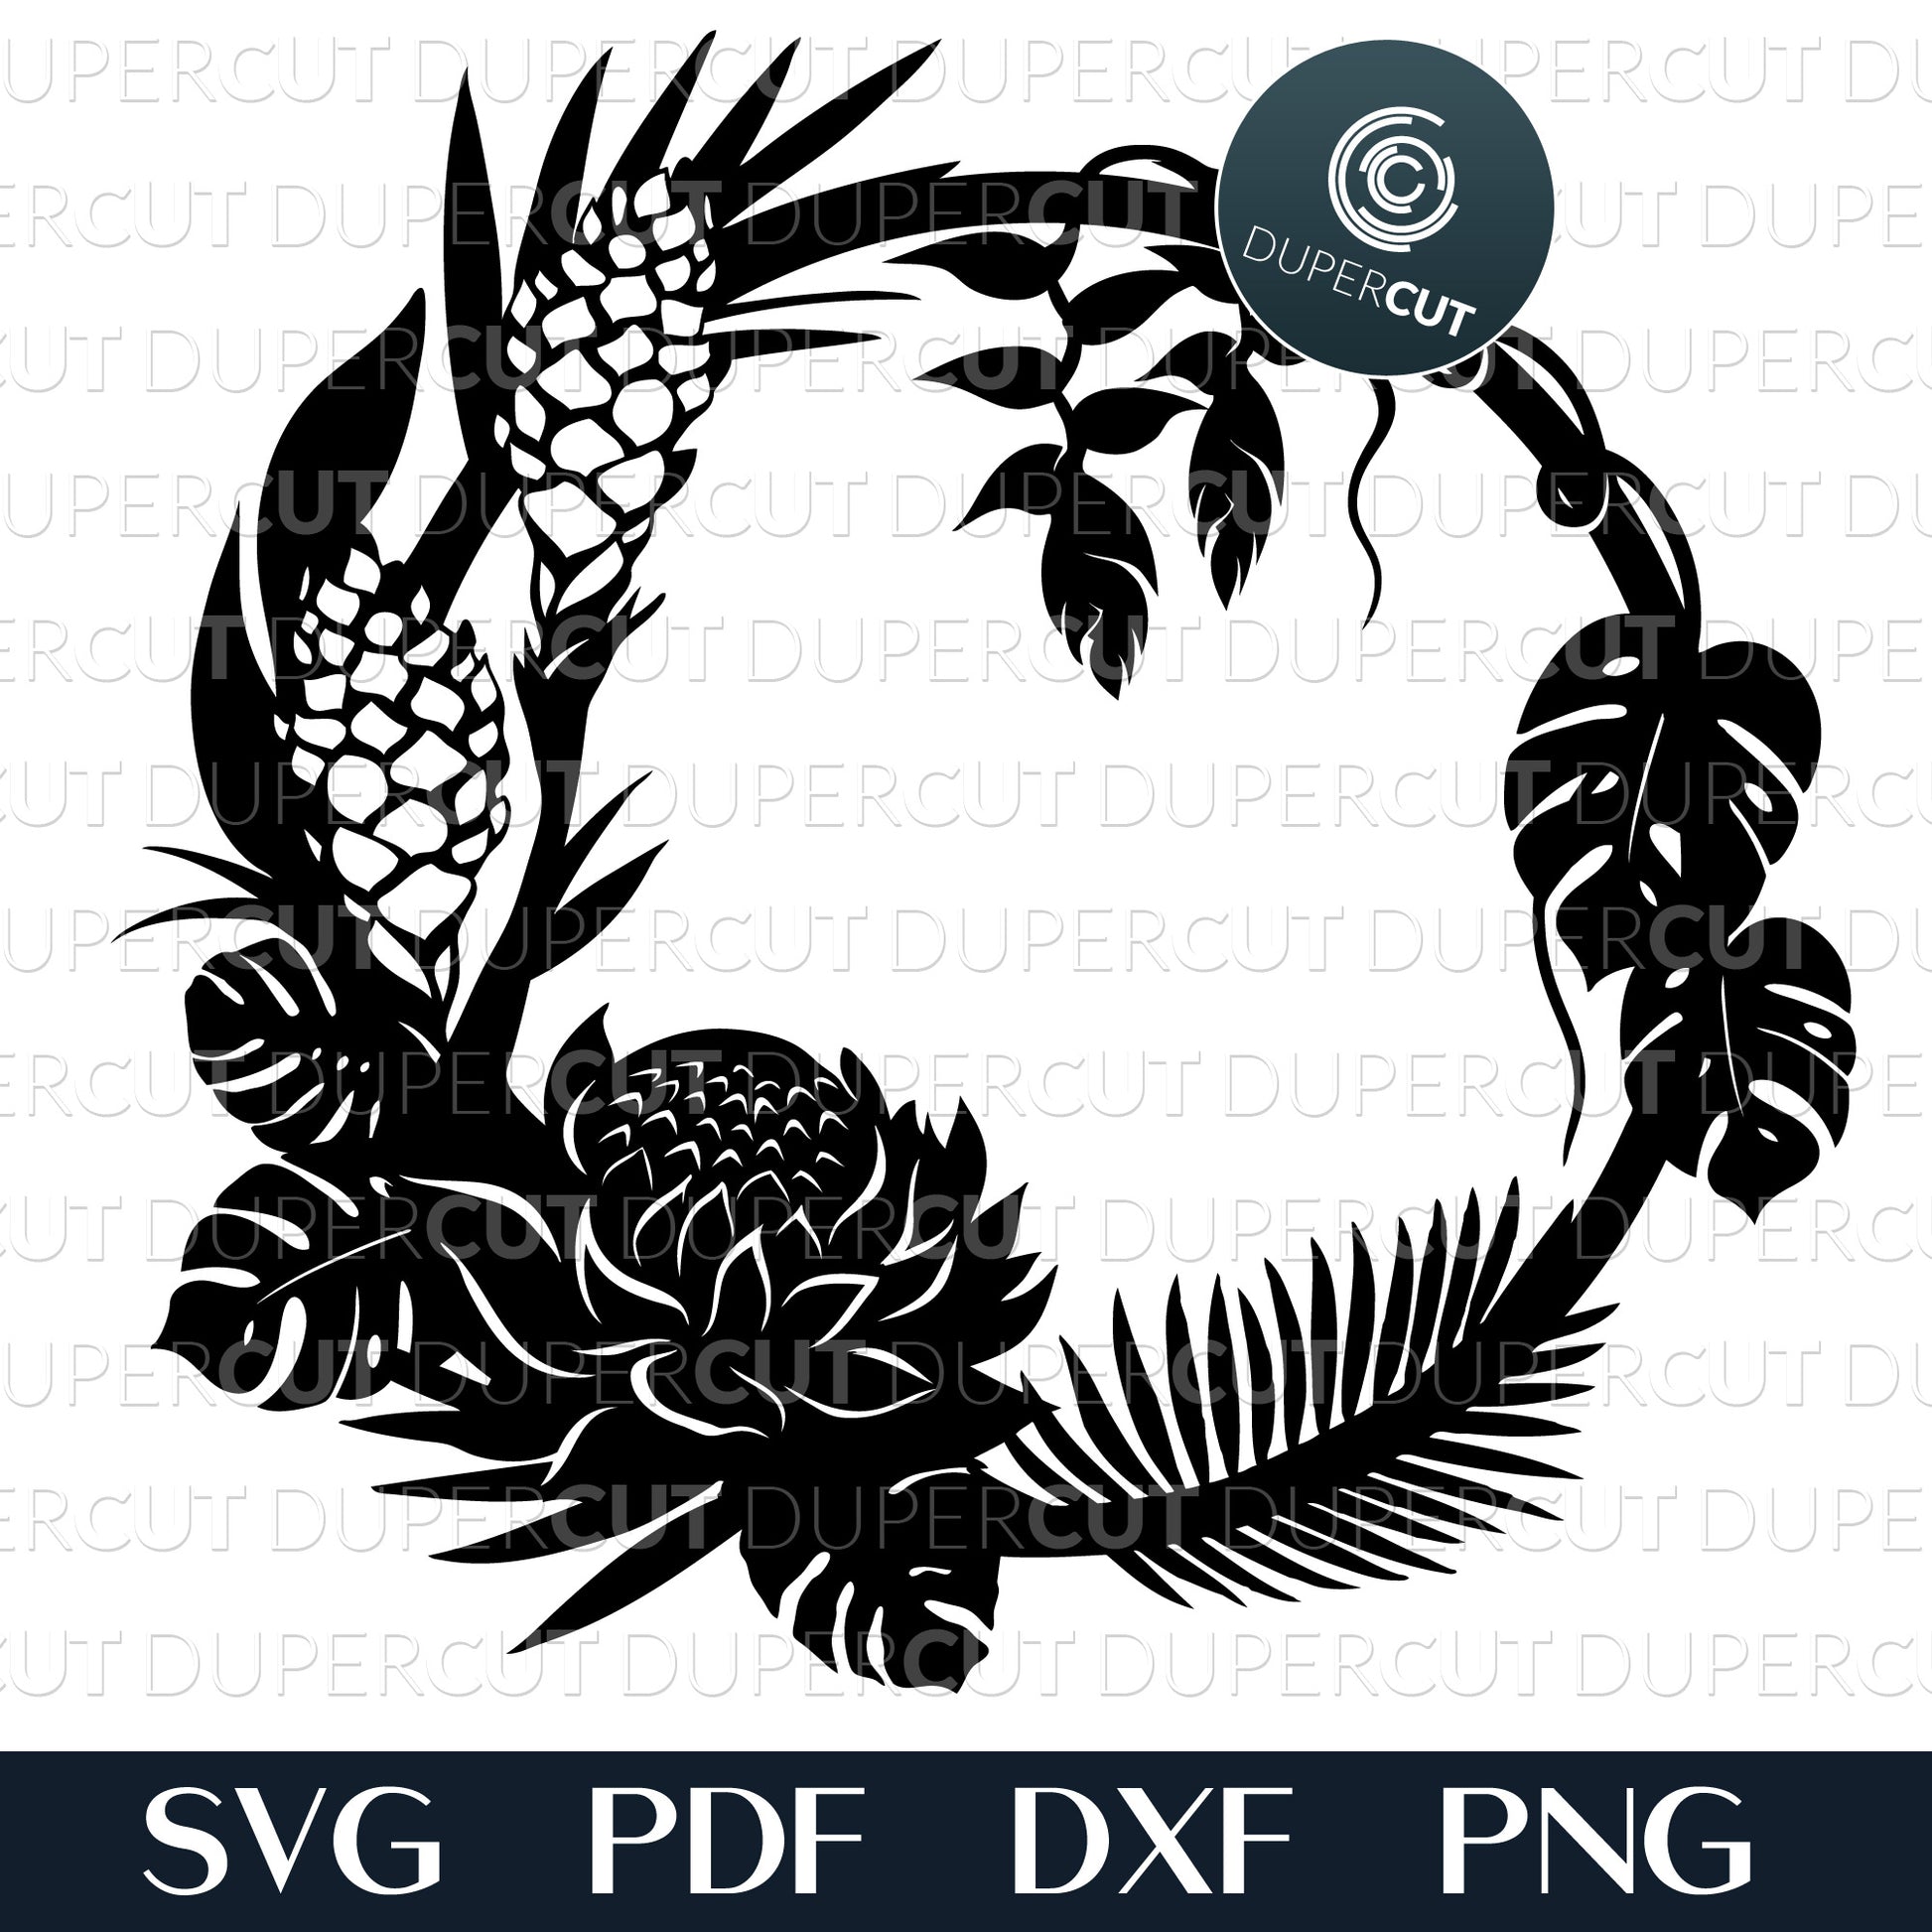 Tropical wreath, palm leaves, tropical plants silhouette. SVG PNG DXF cutting files for Cricut, Glowforge, Silhouette cameo, laser engraving